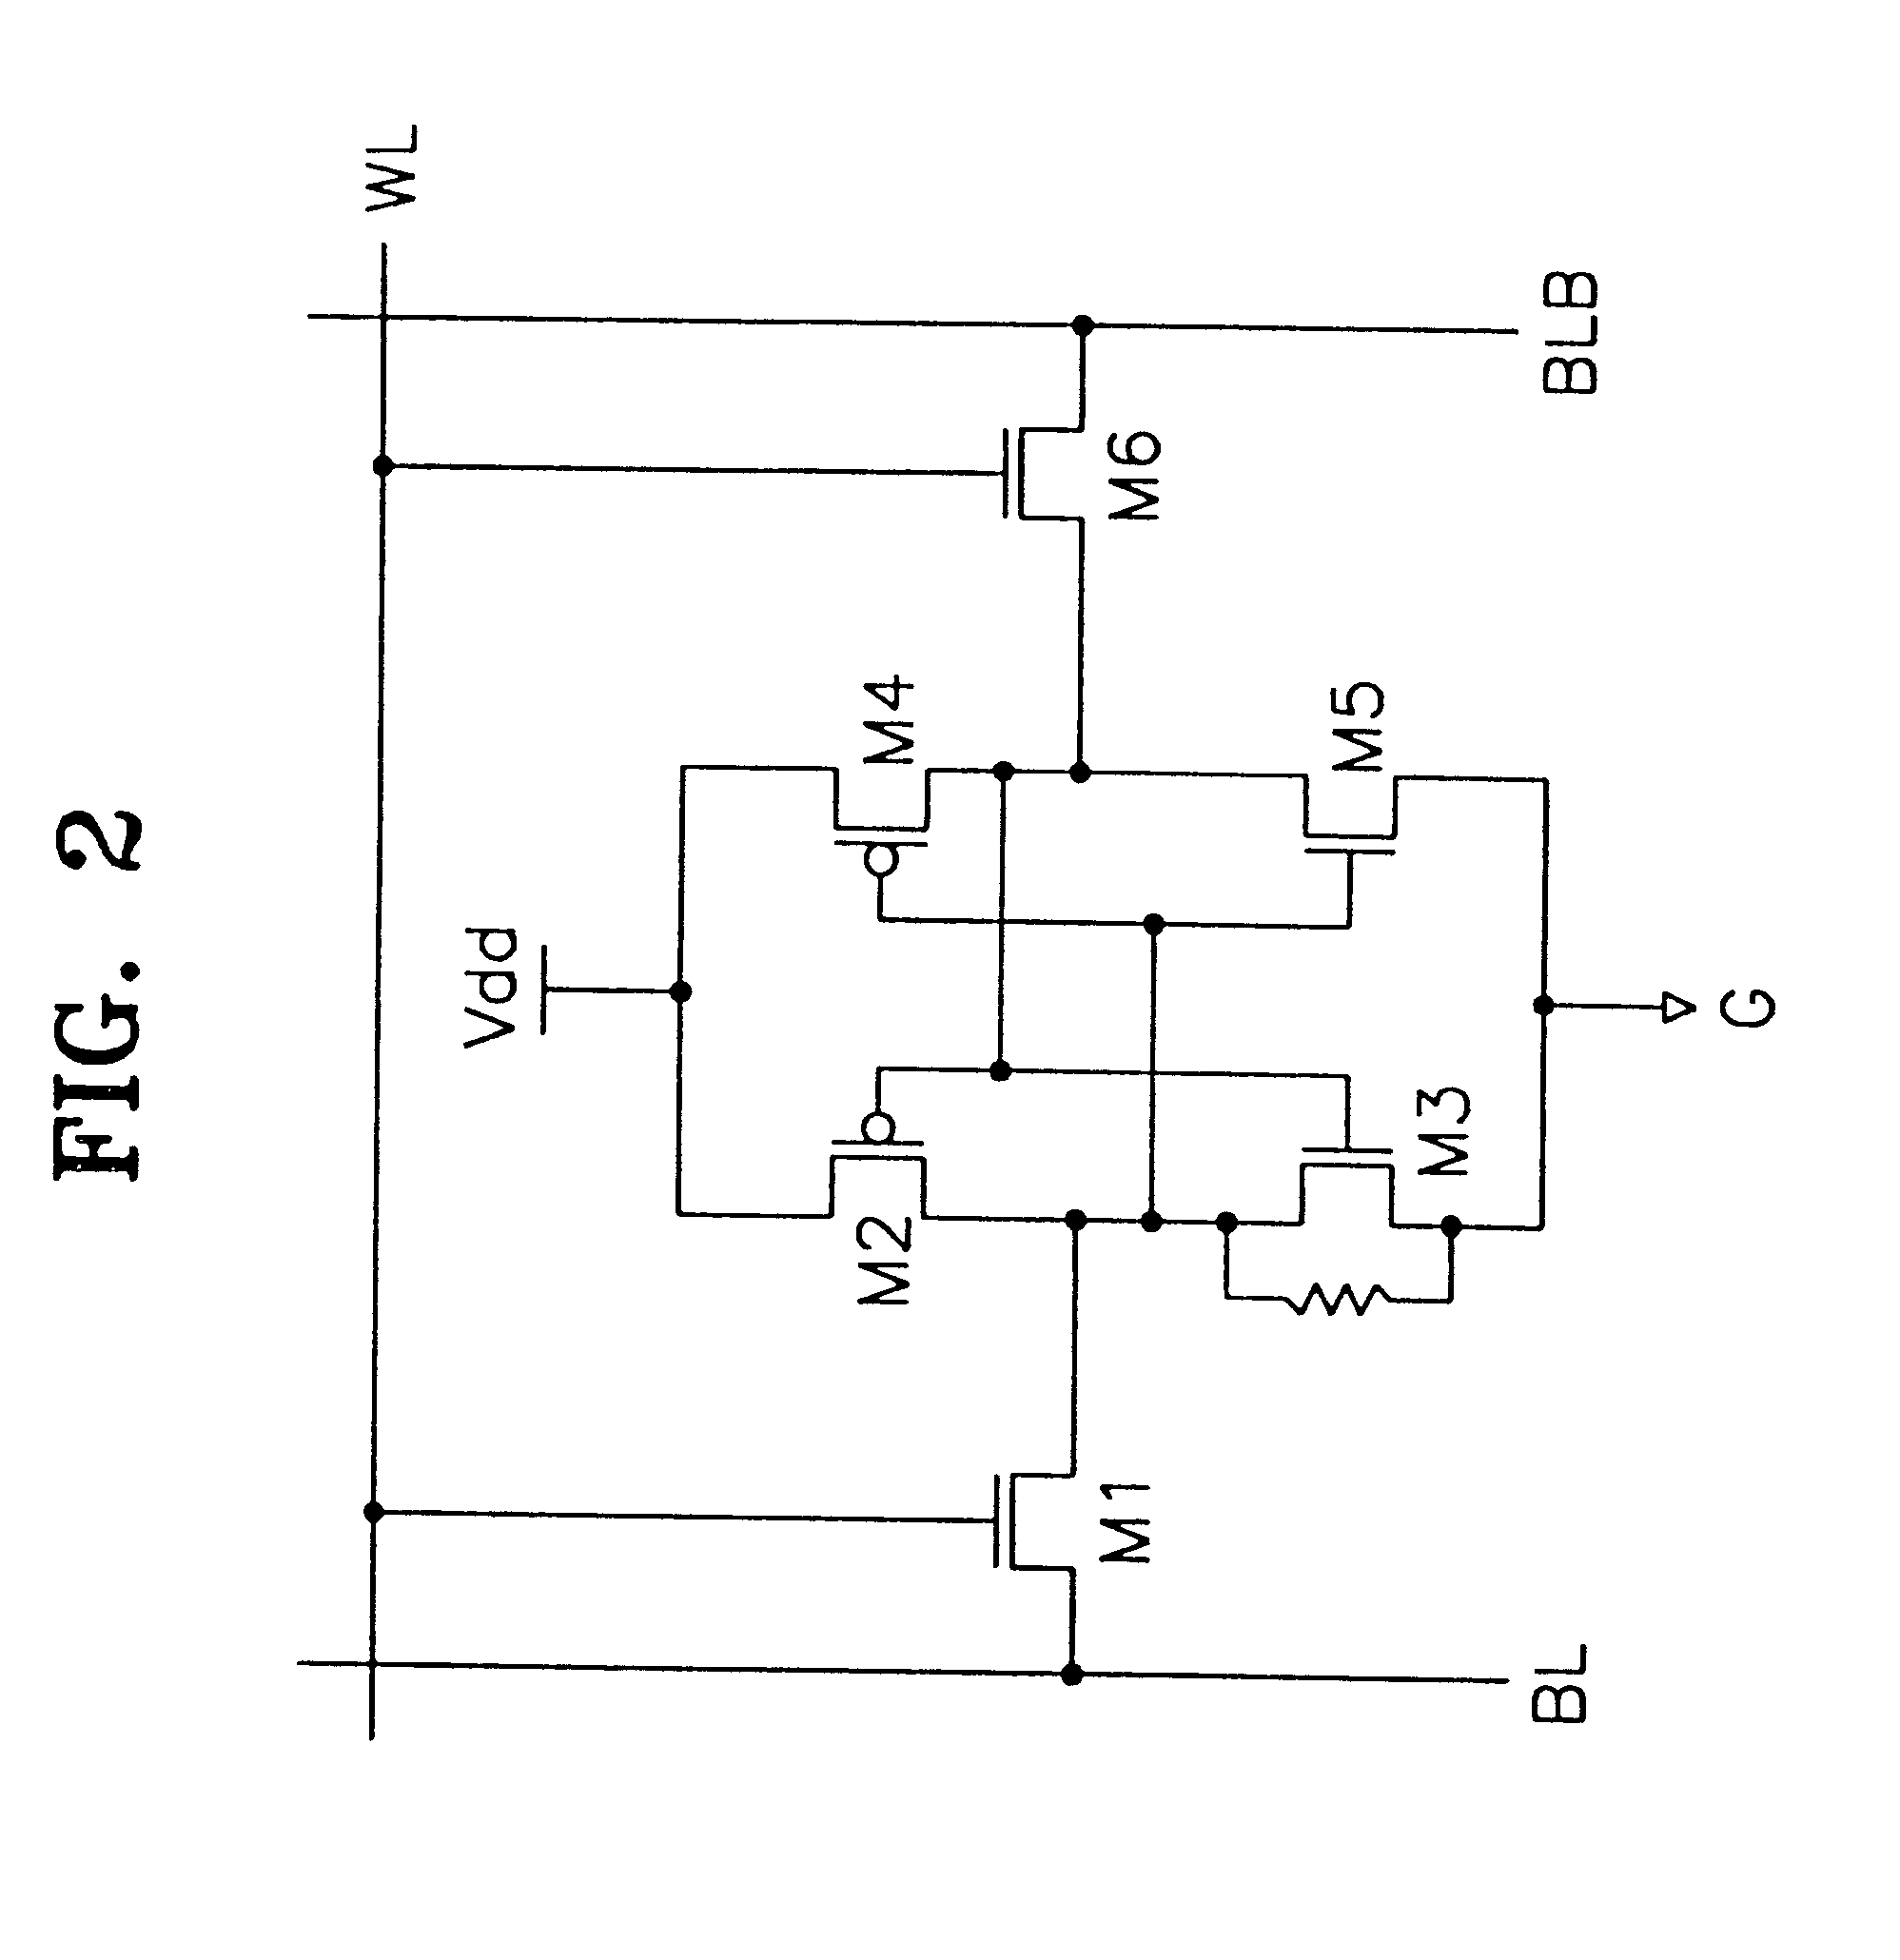 Apparatus and method for detecting faulty of cells in a semiconductor memory device